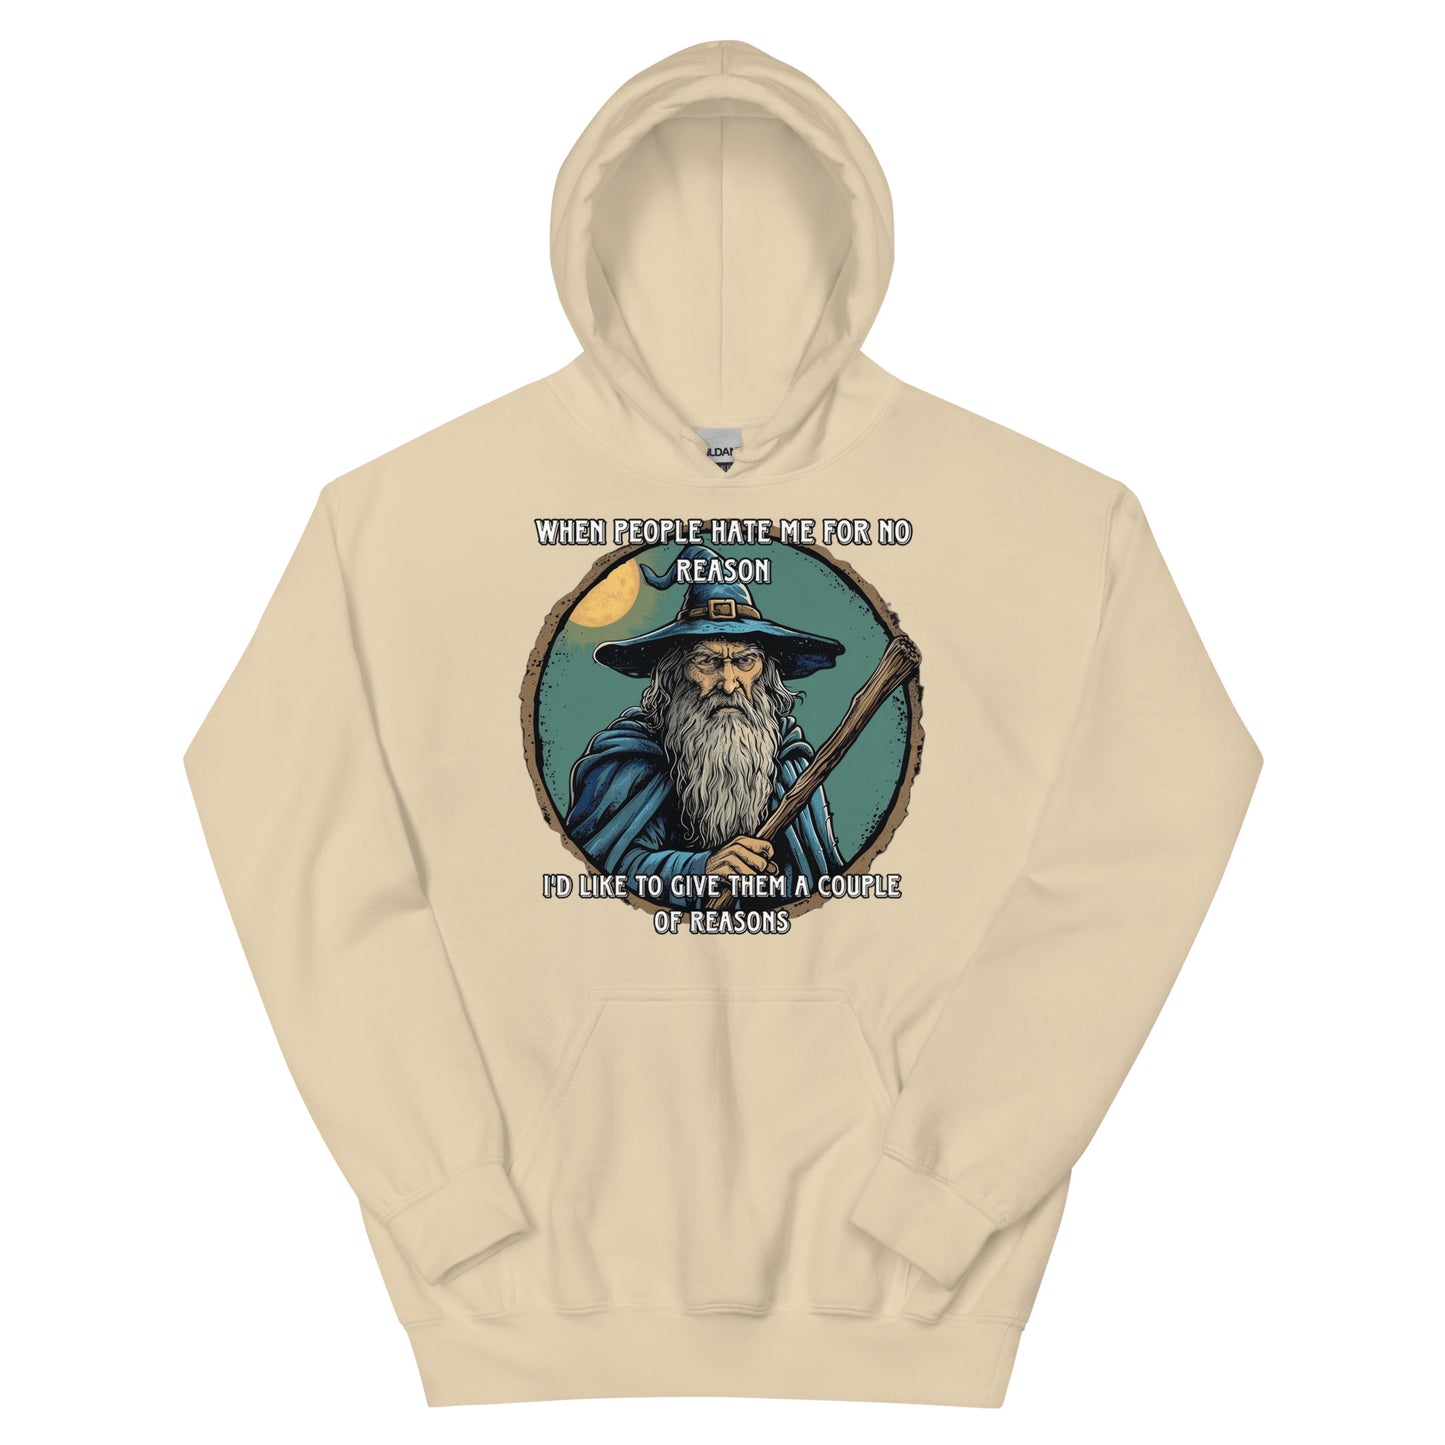 When people hate me for no reason I’d like to give them a couple of reasons Hoodie